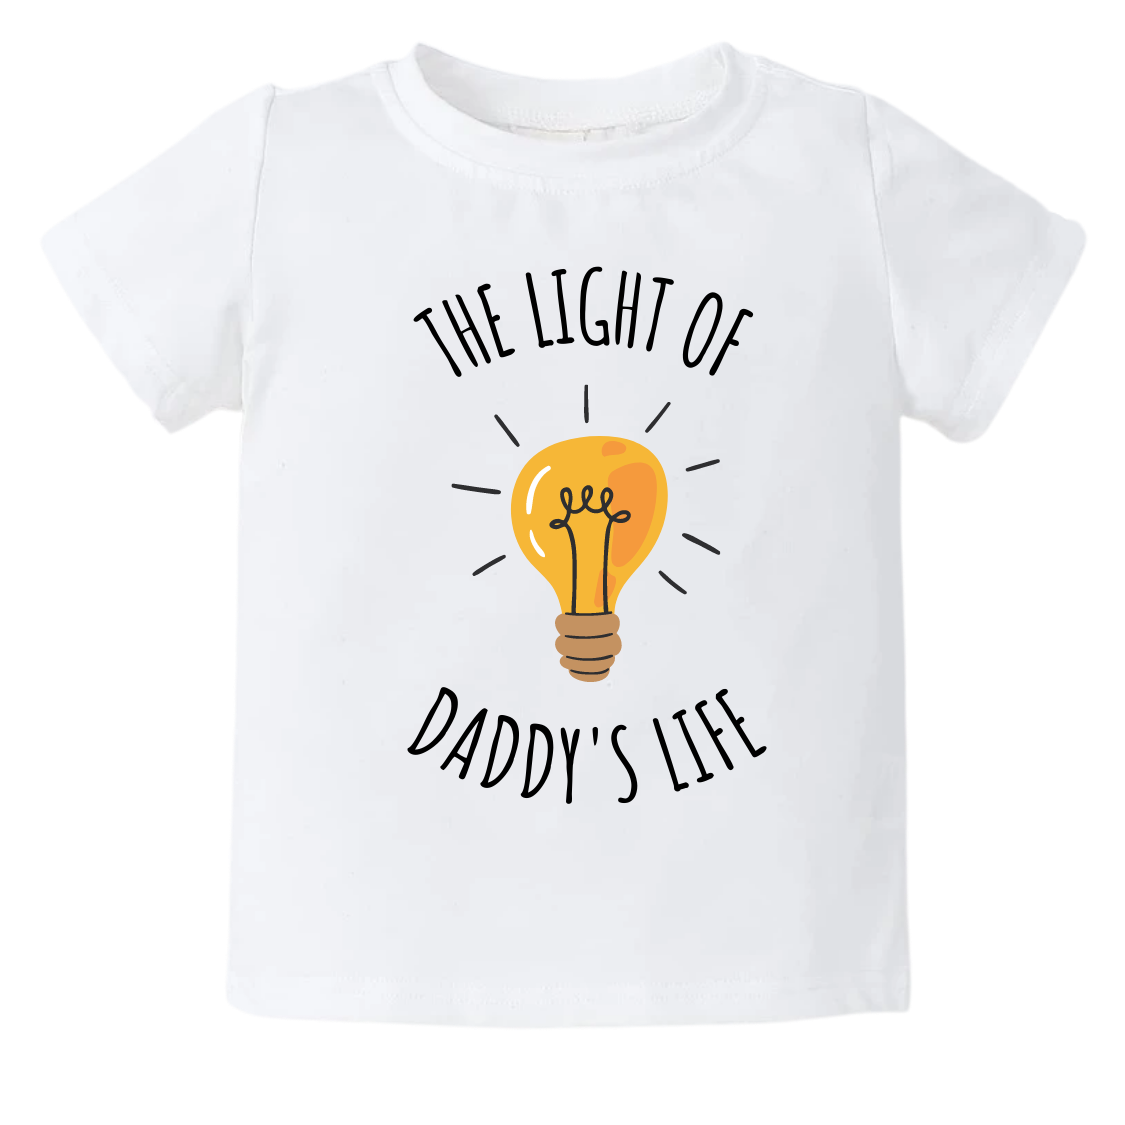 Toddler Shirt Made with high-quality materials, it offers comfort and durability, making it a perfect addition to any child's wardrobe.